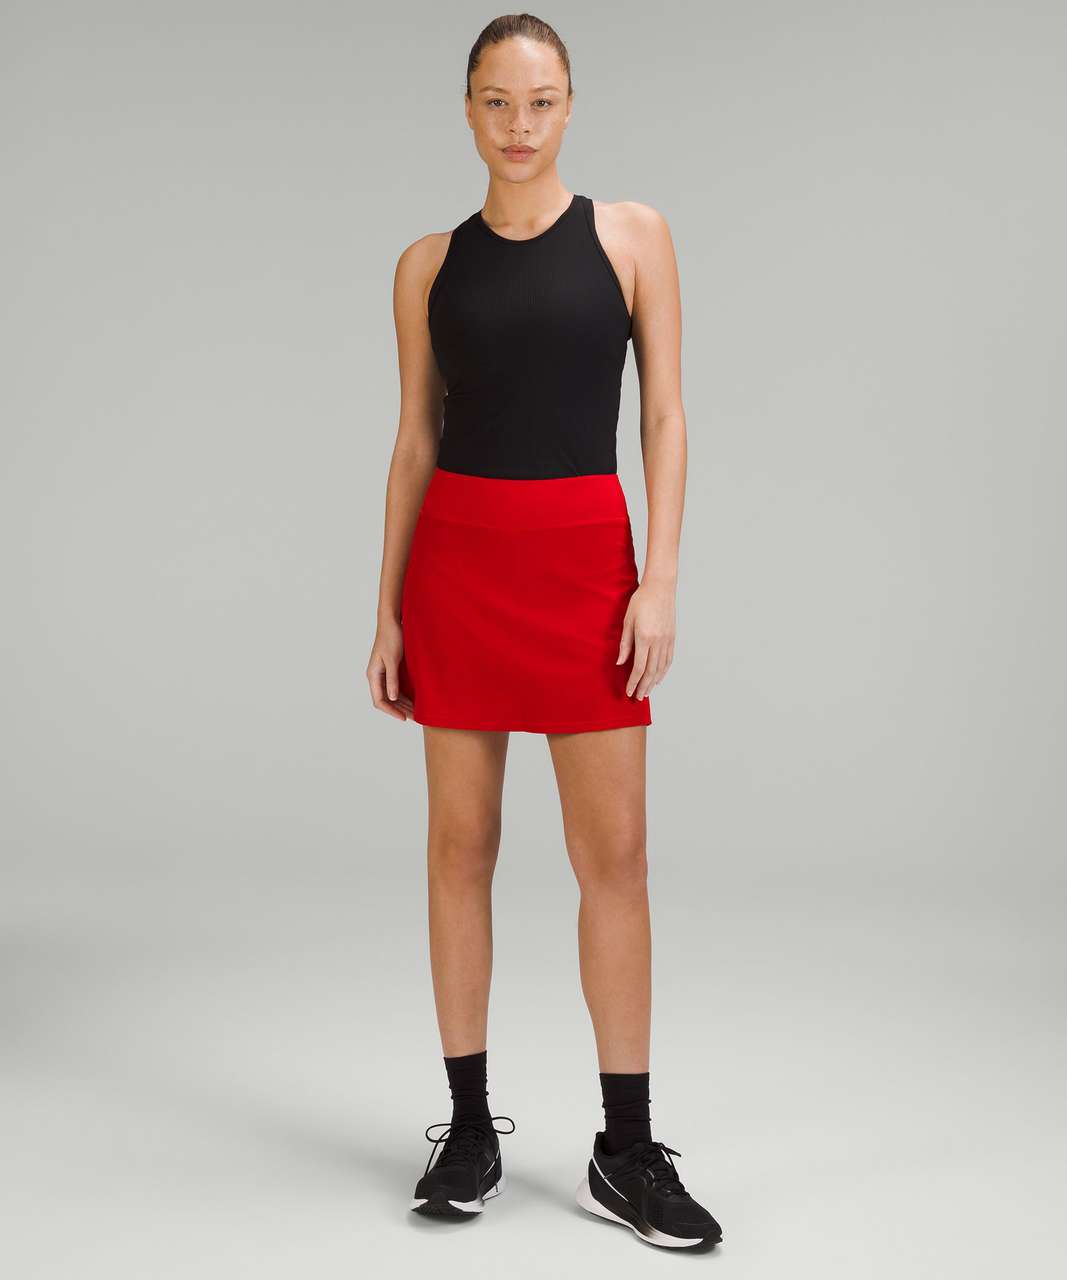 Lululemon Pace Rival Mid-Rise Skirt *Extra Long - Dark Red